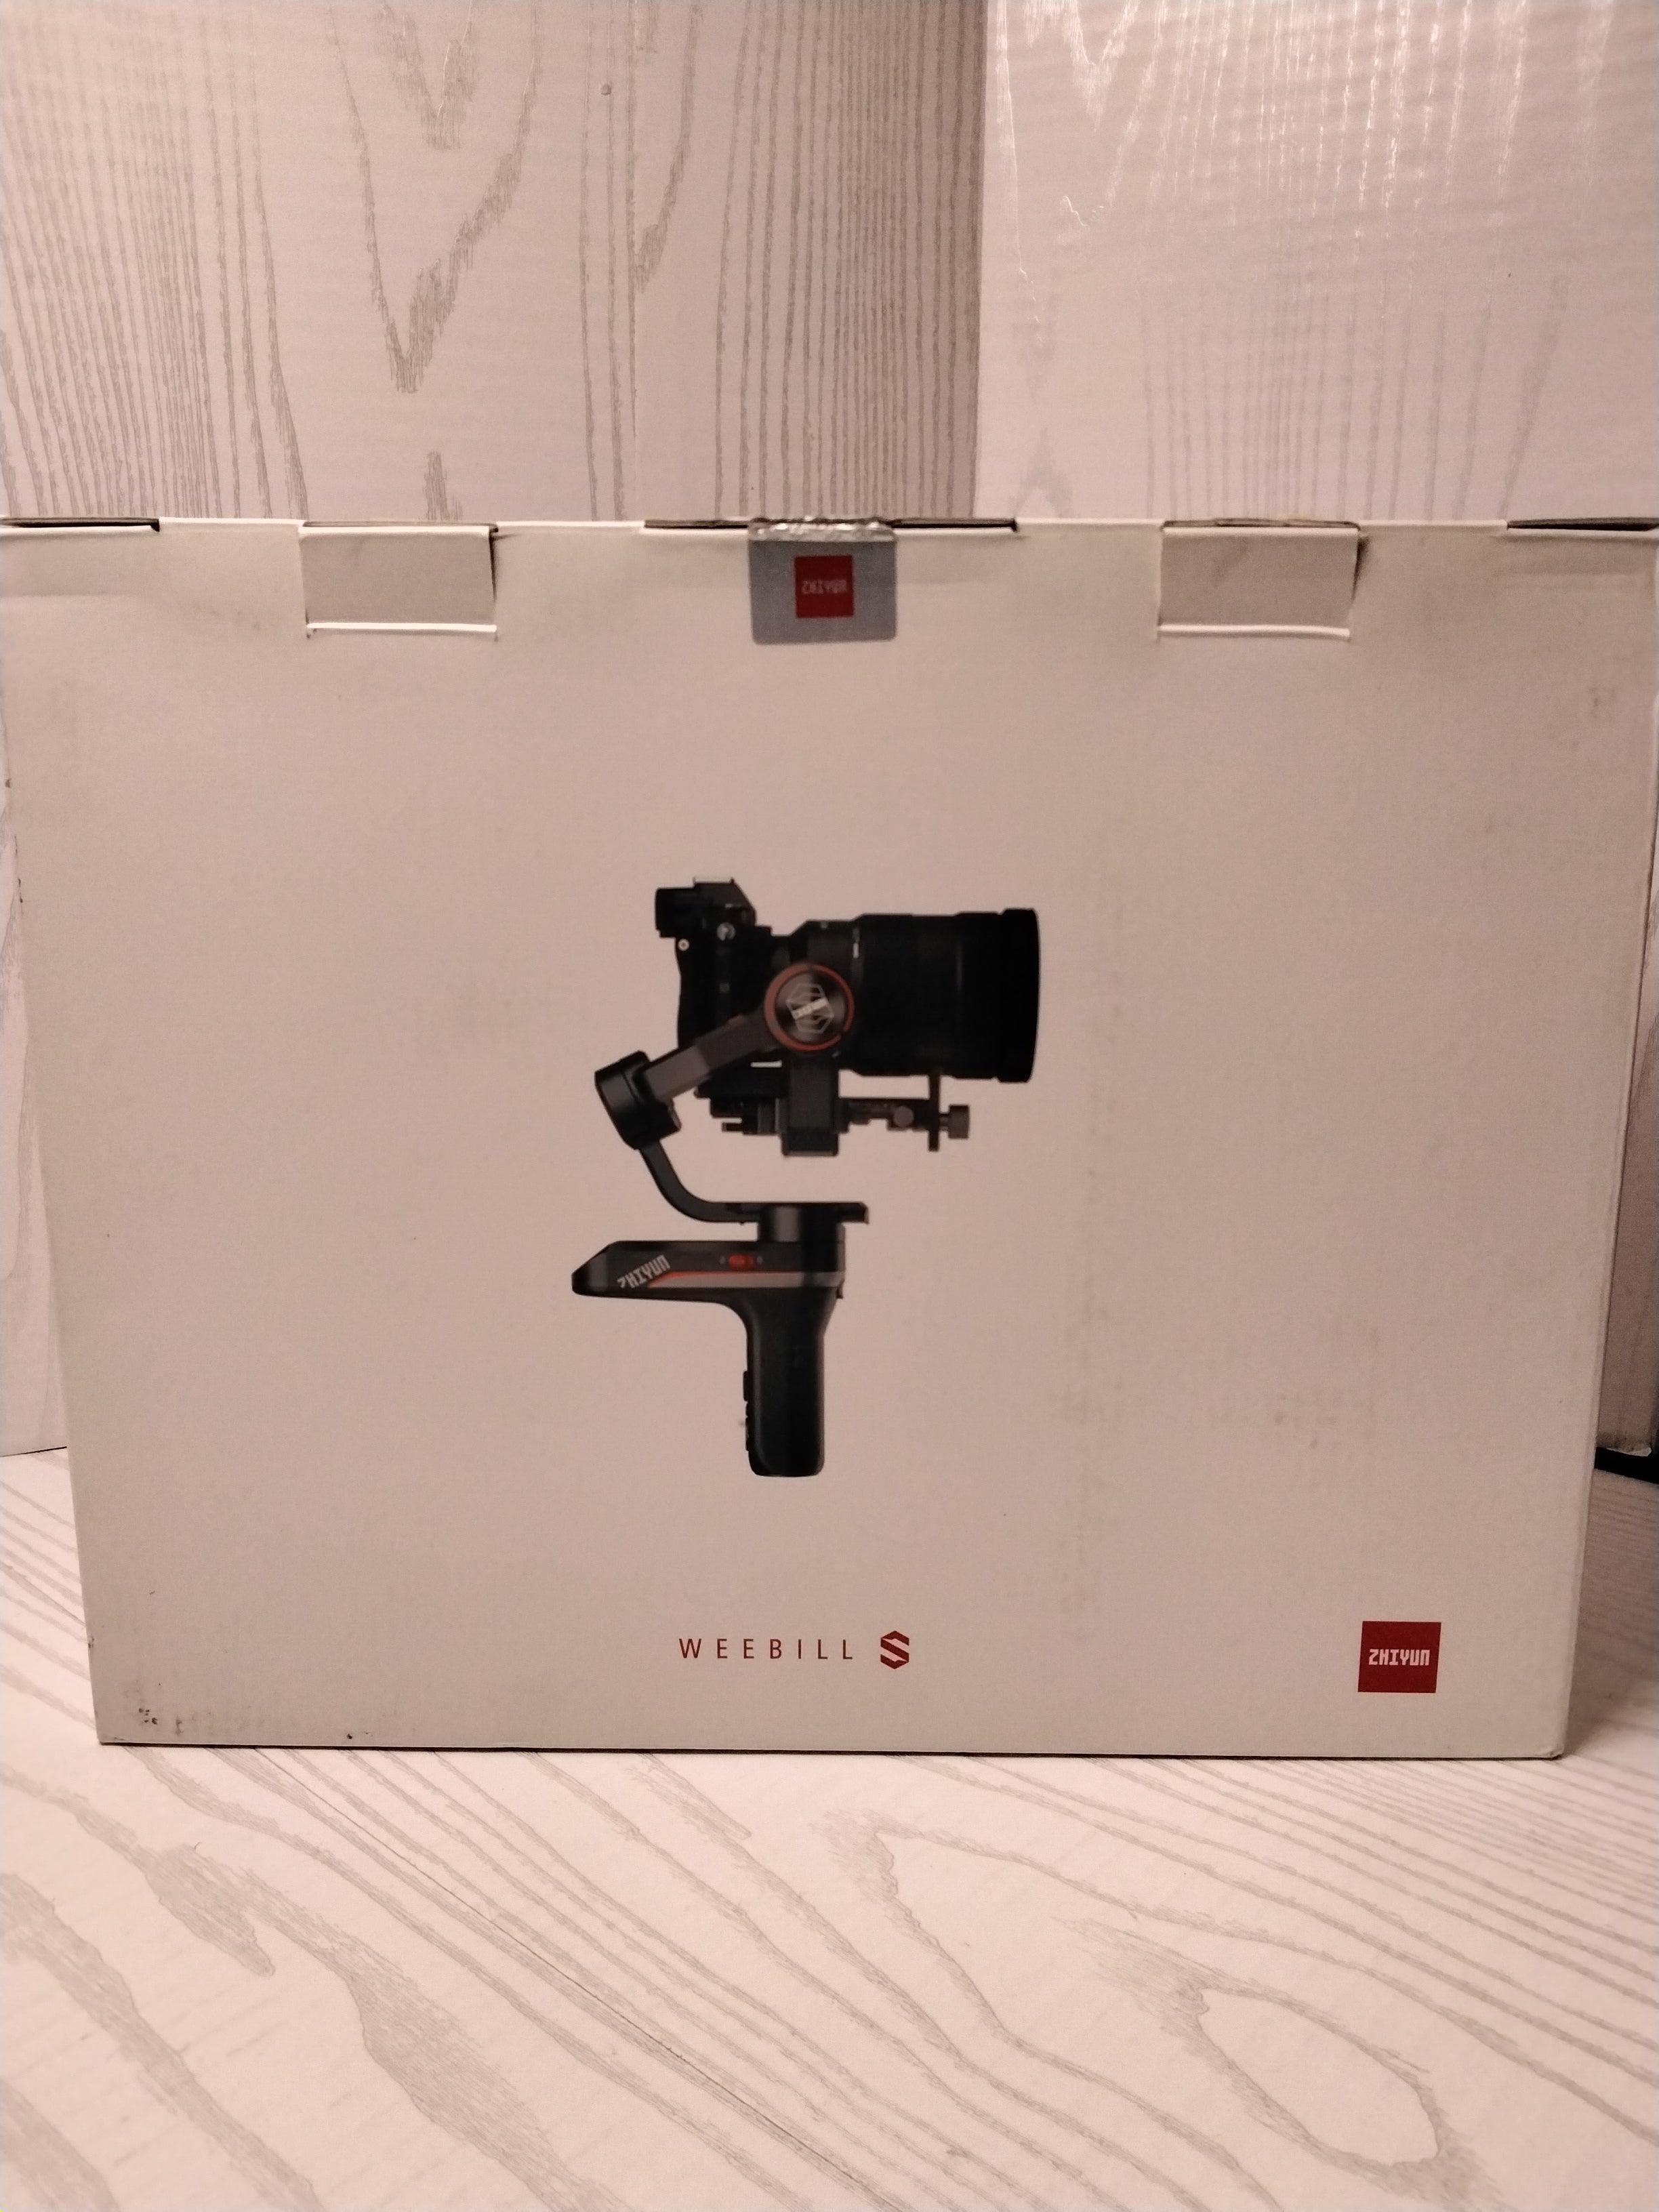 *FOR PARTS* Zhiyun Weebill S, 3-Axis Gimbal Stabilizer for DSLR Cameras (7753057534190)